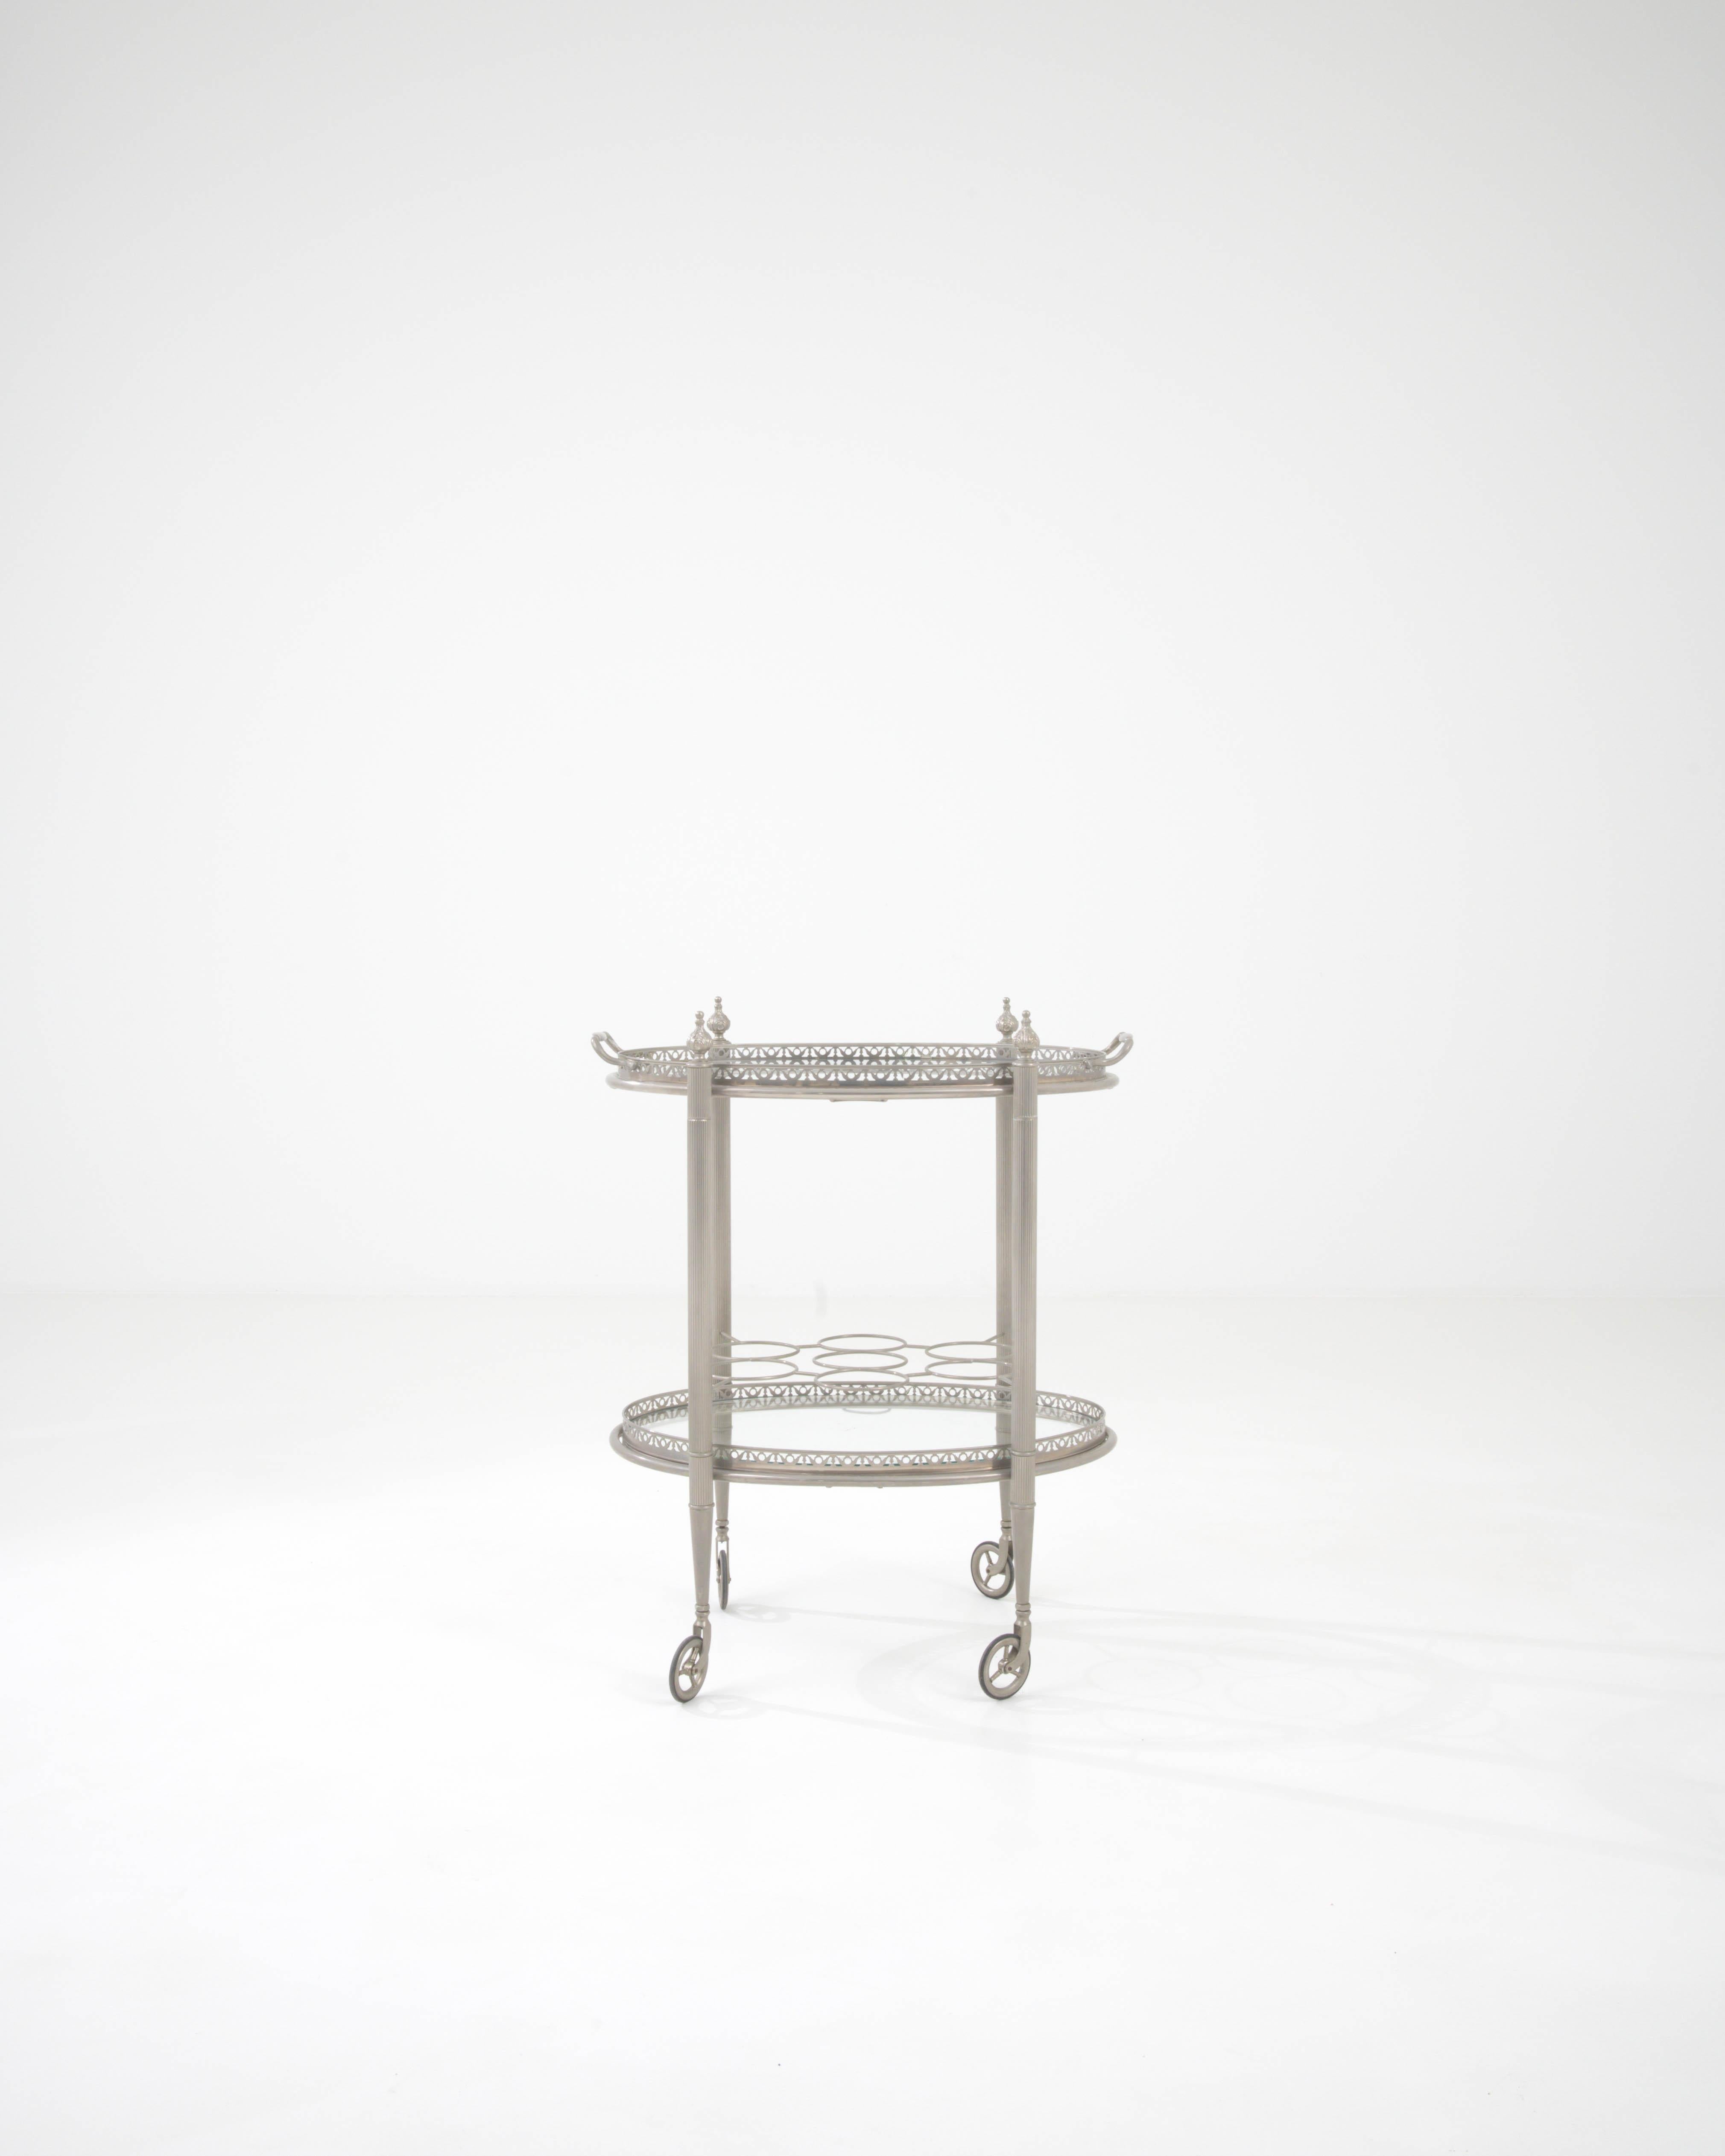 This 20th Century French Metal & Glass Bar Cart is a quintessential piece that infuses functional design with a whisper of romantic nostalgia. Fashioned from fine metal, its frame boasts a silver-tone finish, giving it a subtle glow that complements